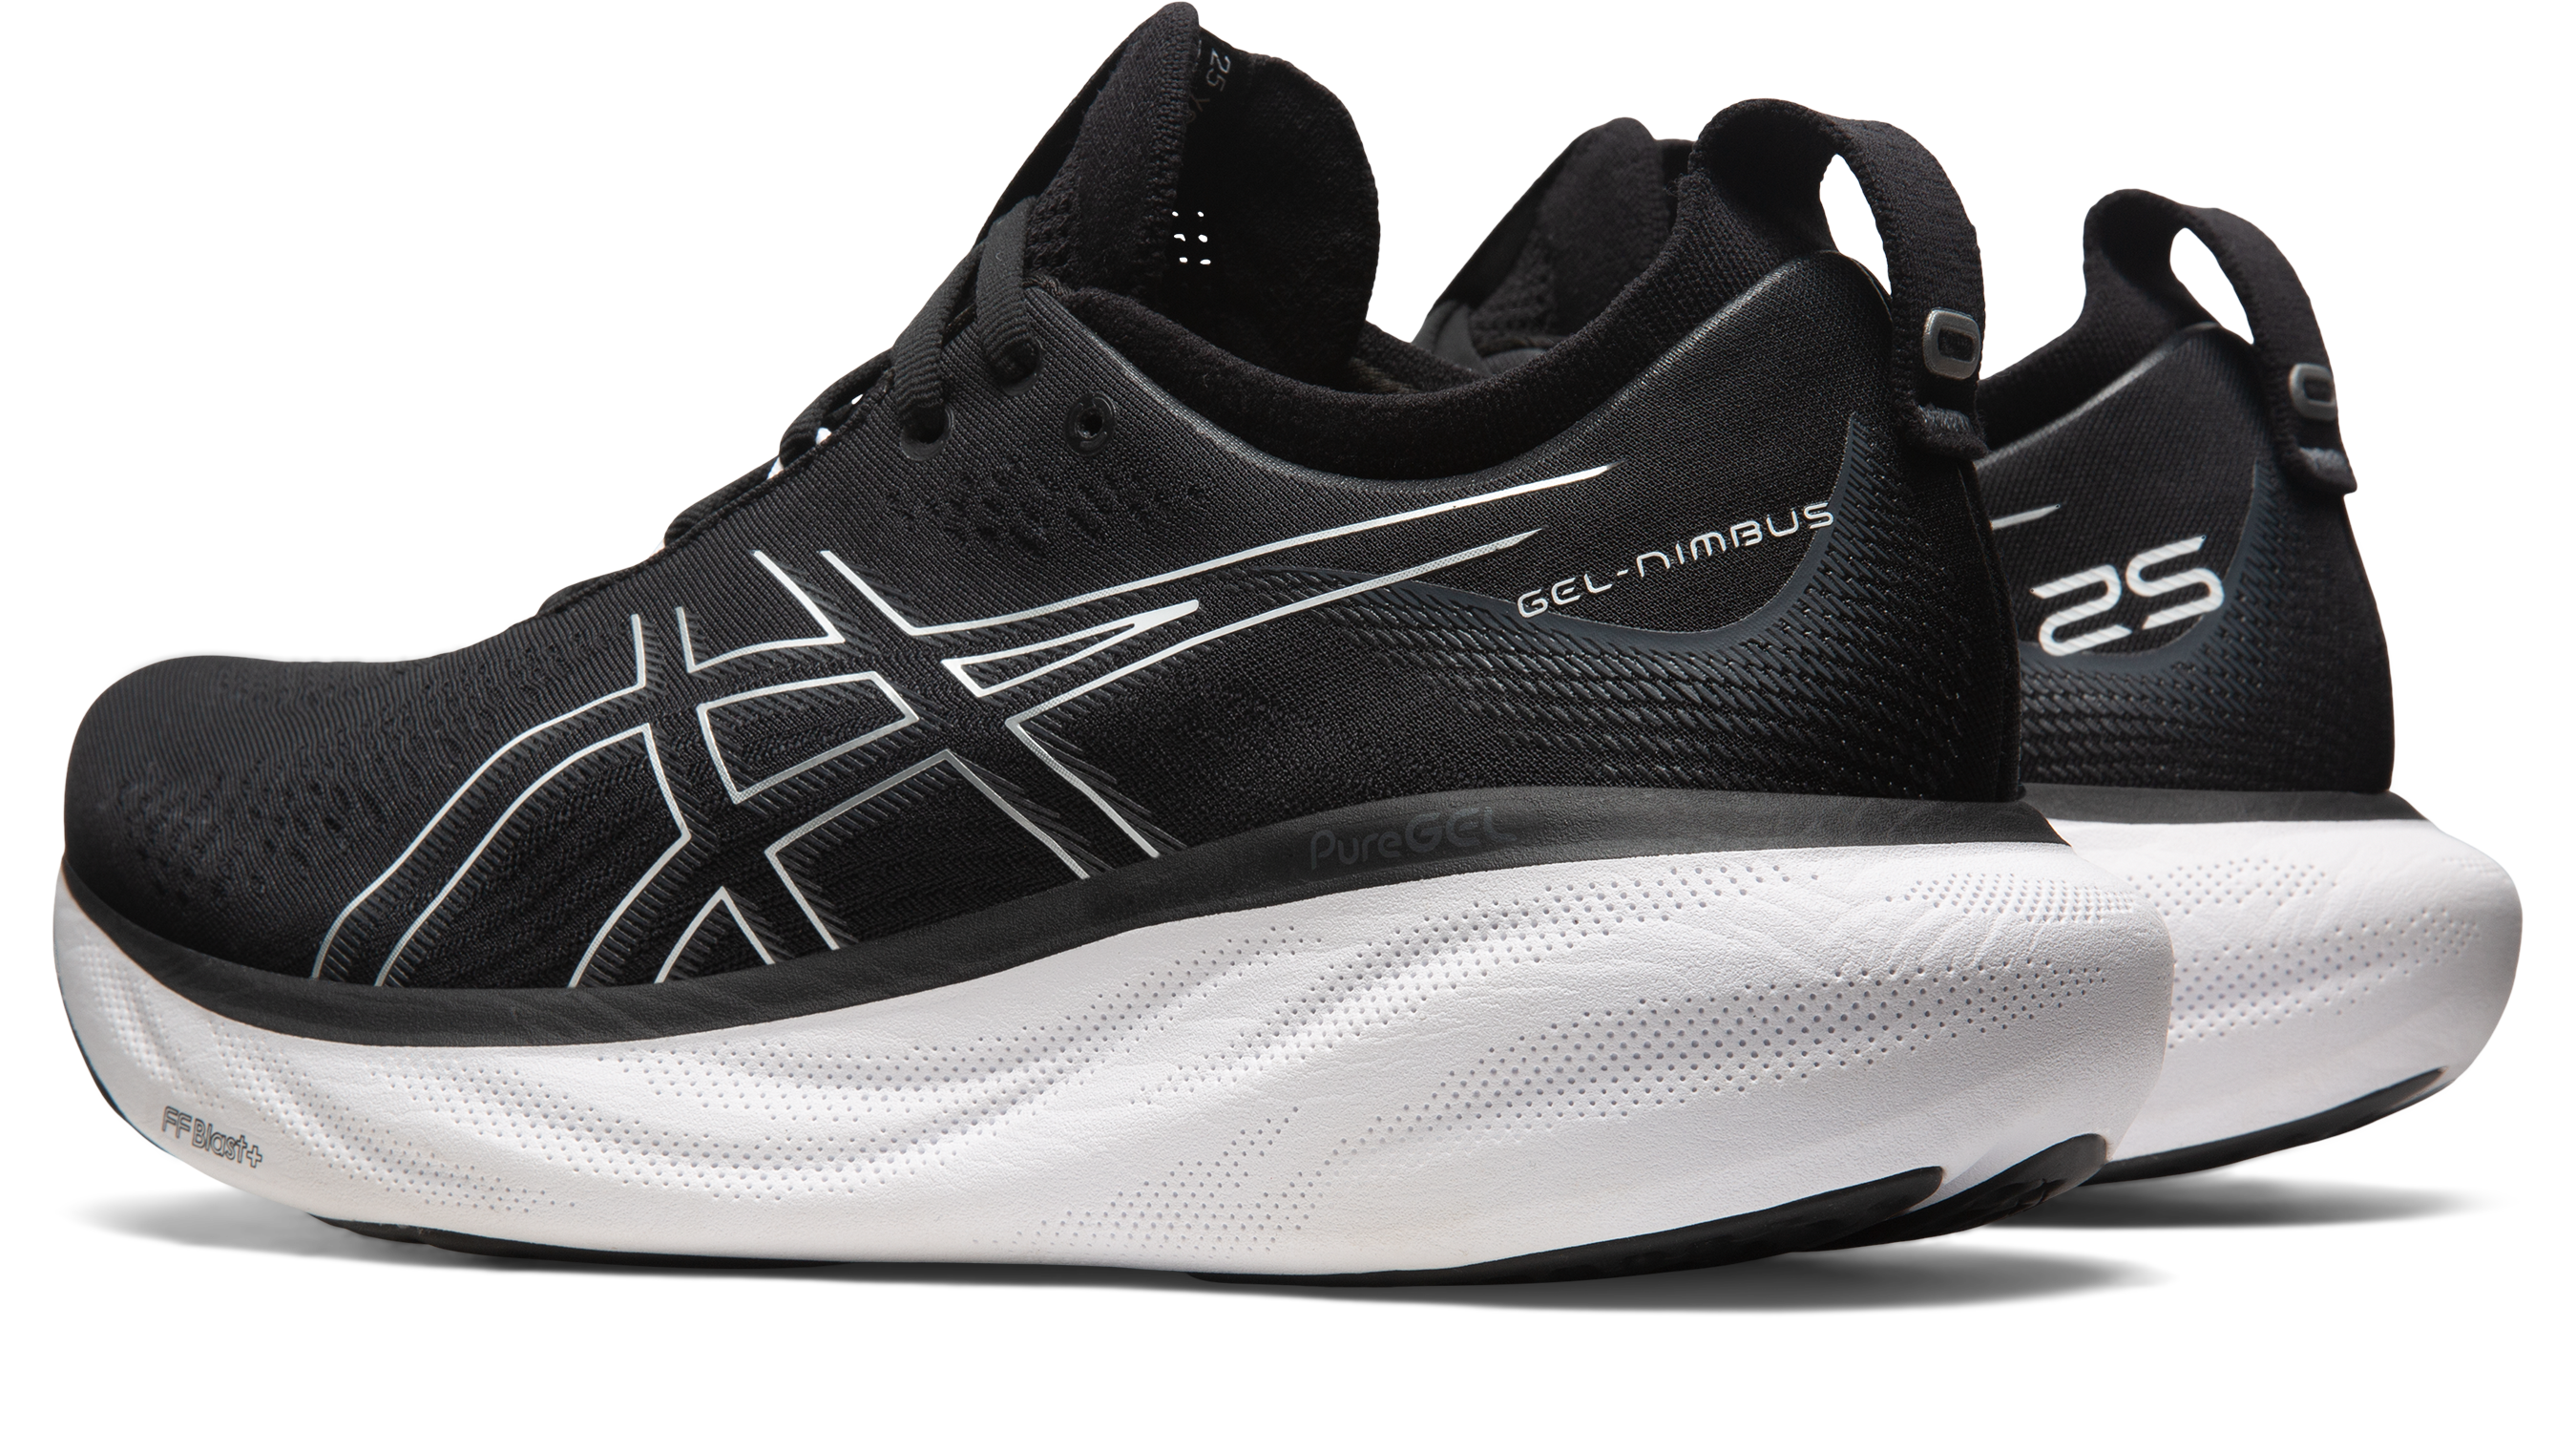 Asics Men's Gel-Nimbus 25 Extra Wide (4E) Running Shoes in Black/Pure Silver